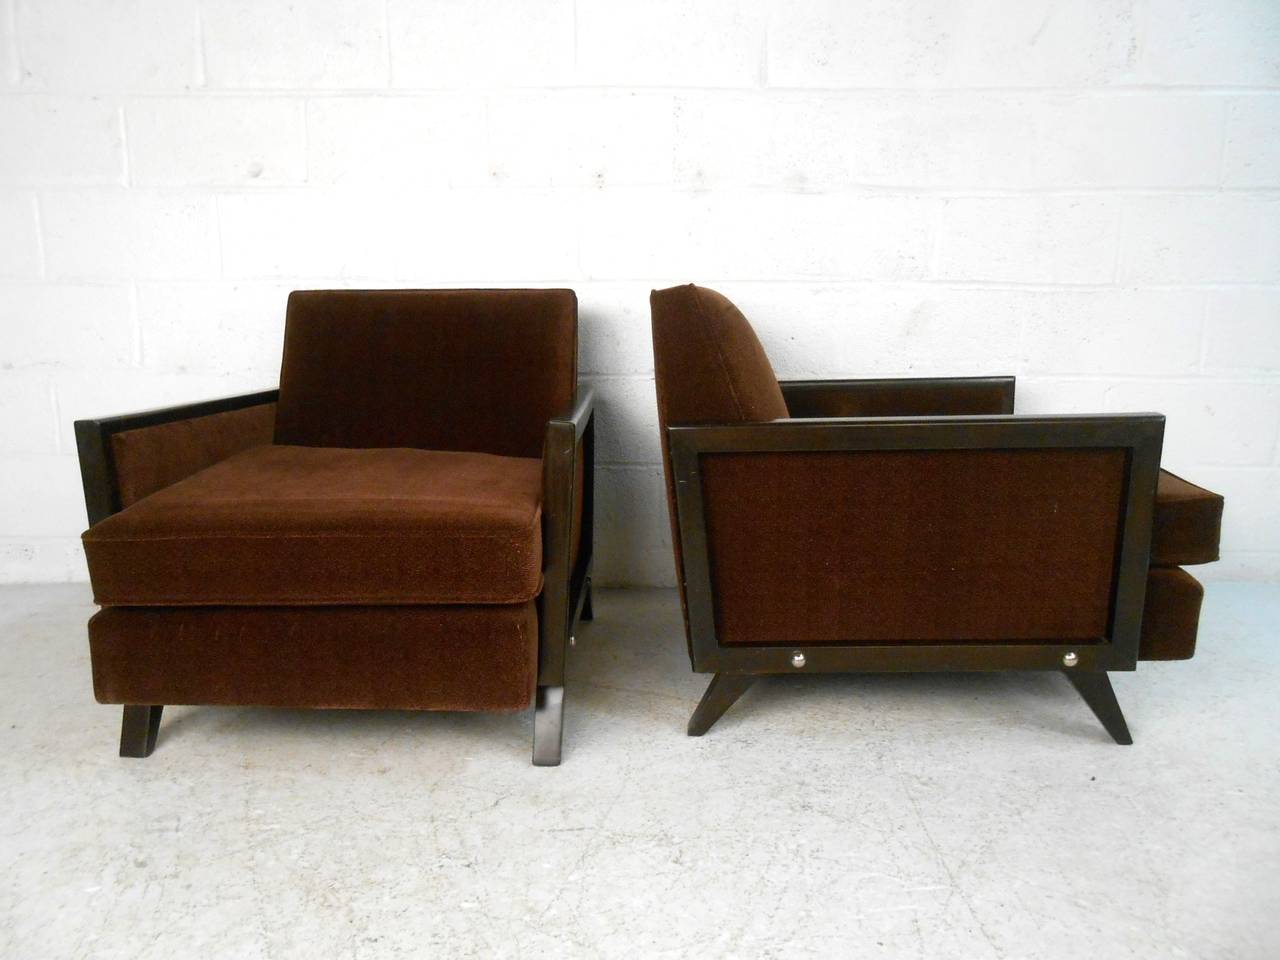 Upholstery Pair of Mid-Century Modern Upholstered Lounge Chairs